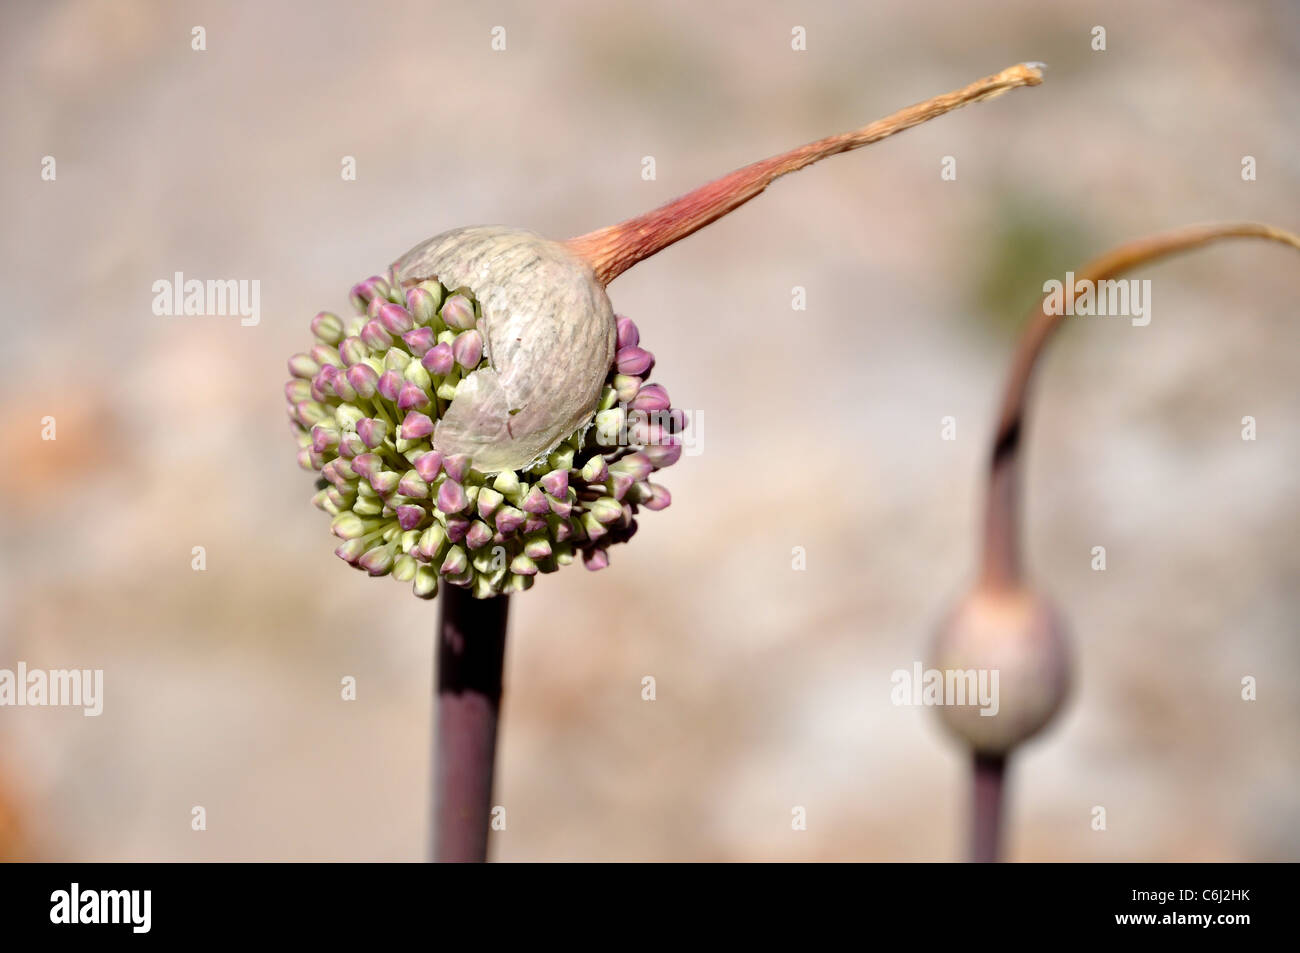 Leek bud in the proces of opening the florets Stock Photo